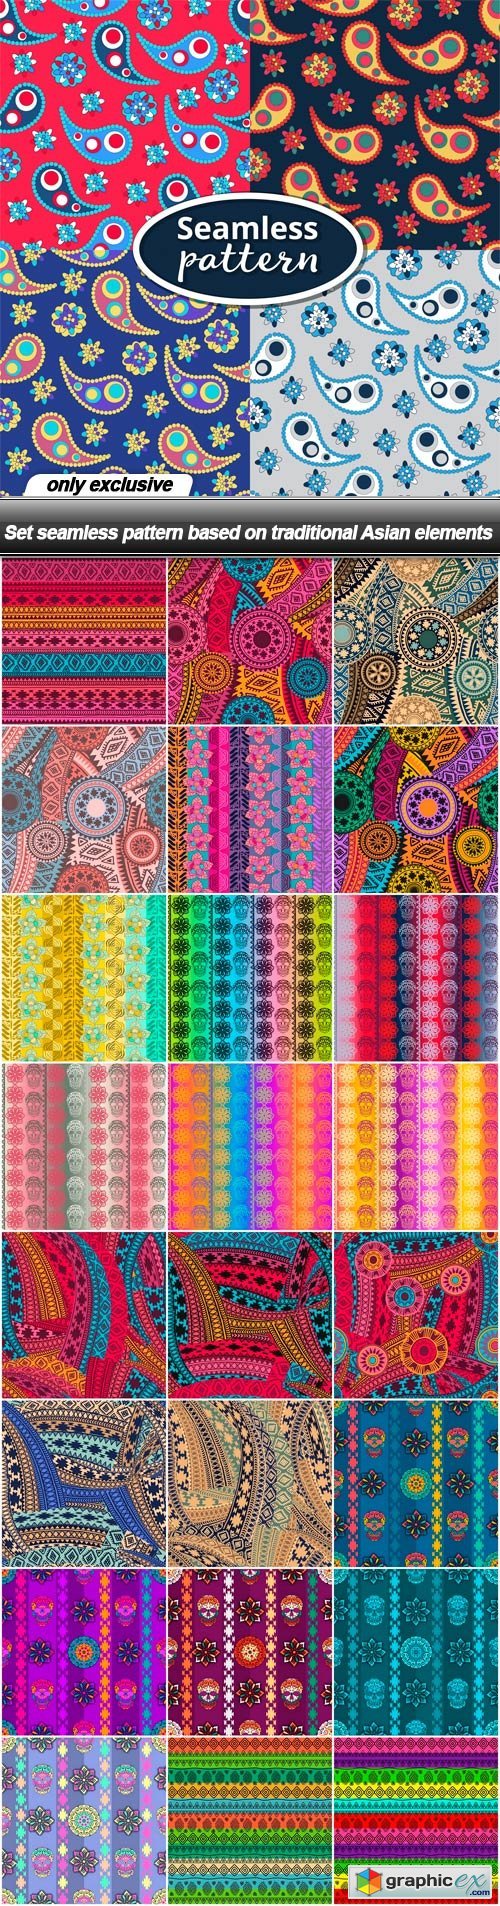 Set seamless pattern based on traditional Asian elements - 25 EPS